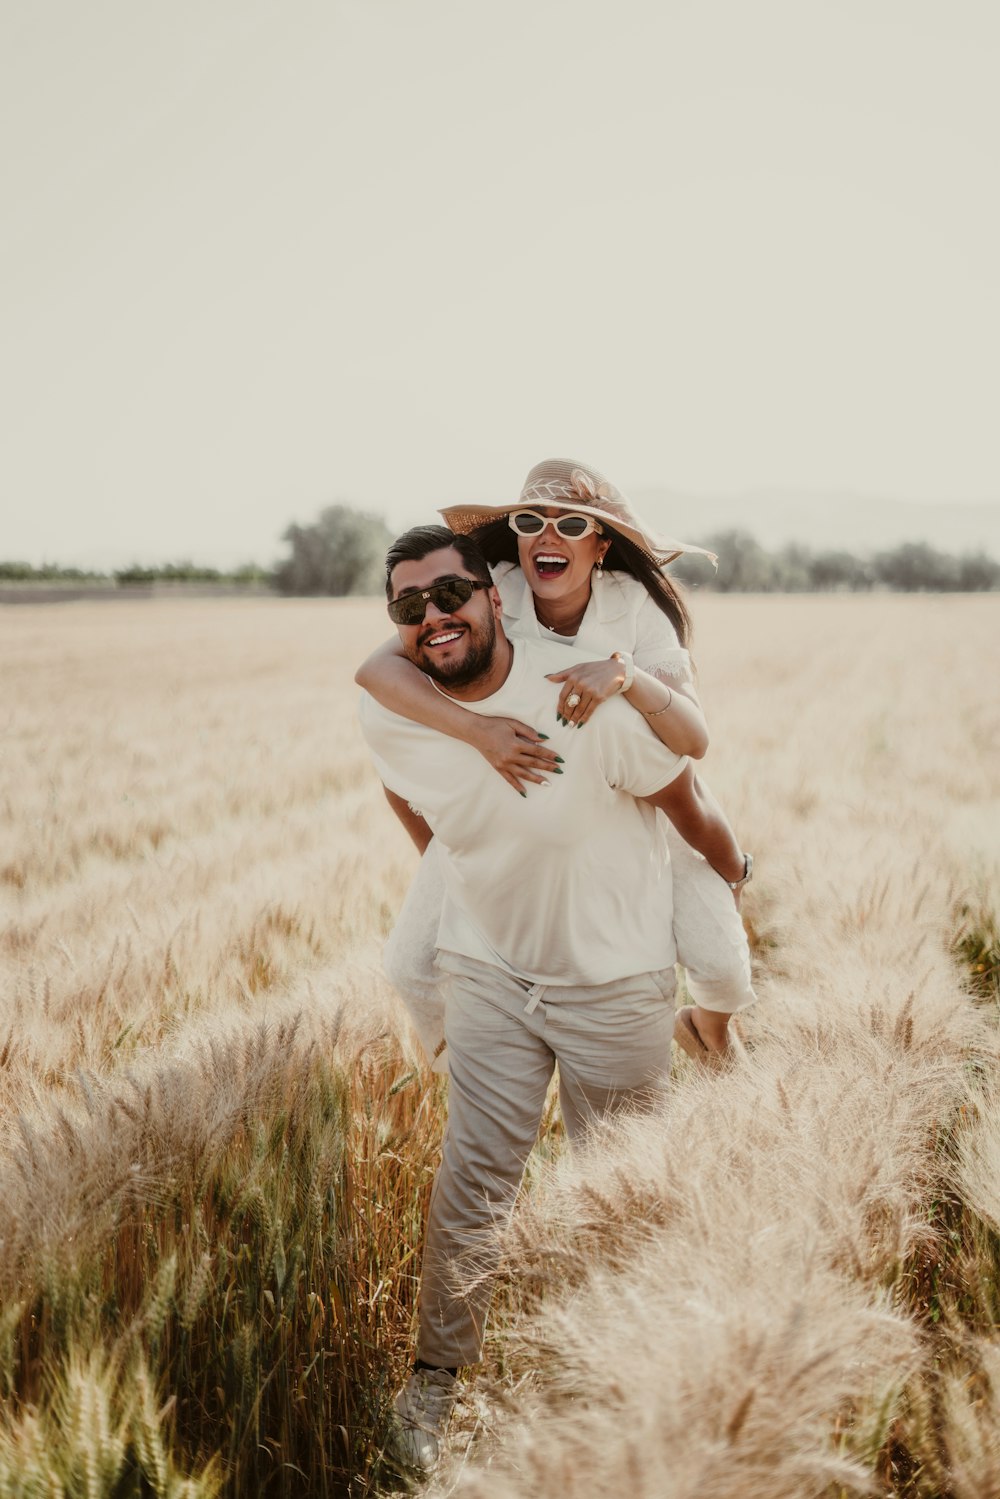 a man carrying a woman on his back through a wheat field